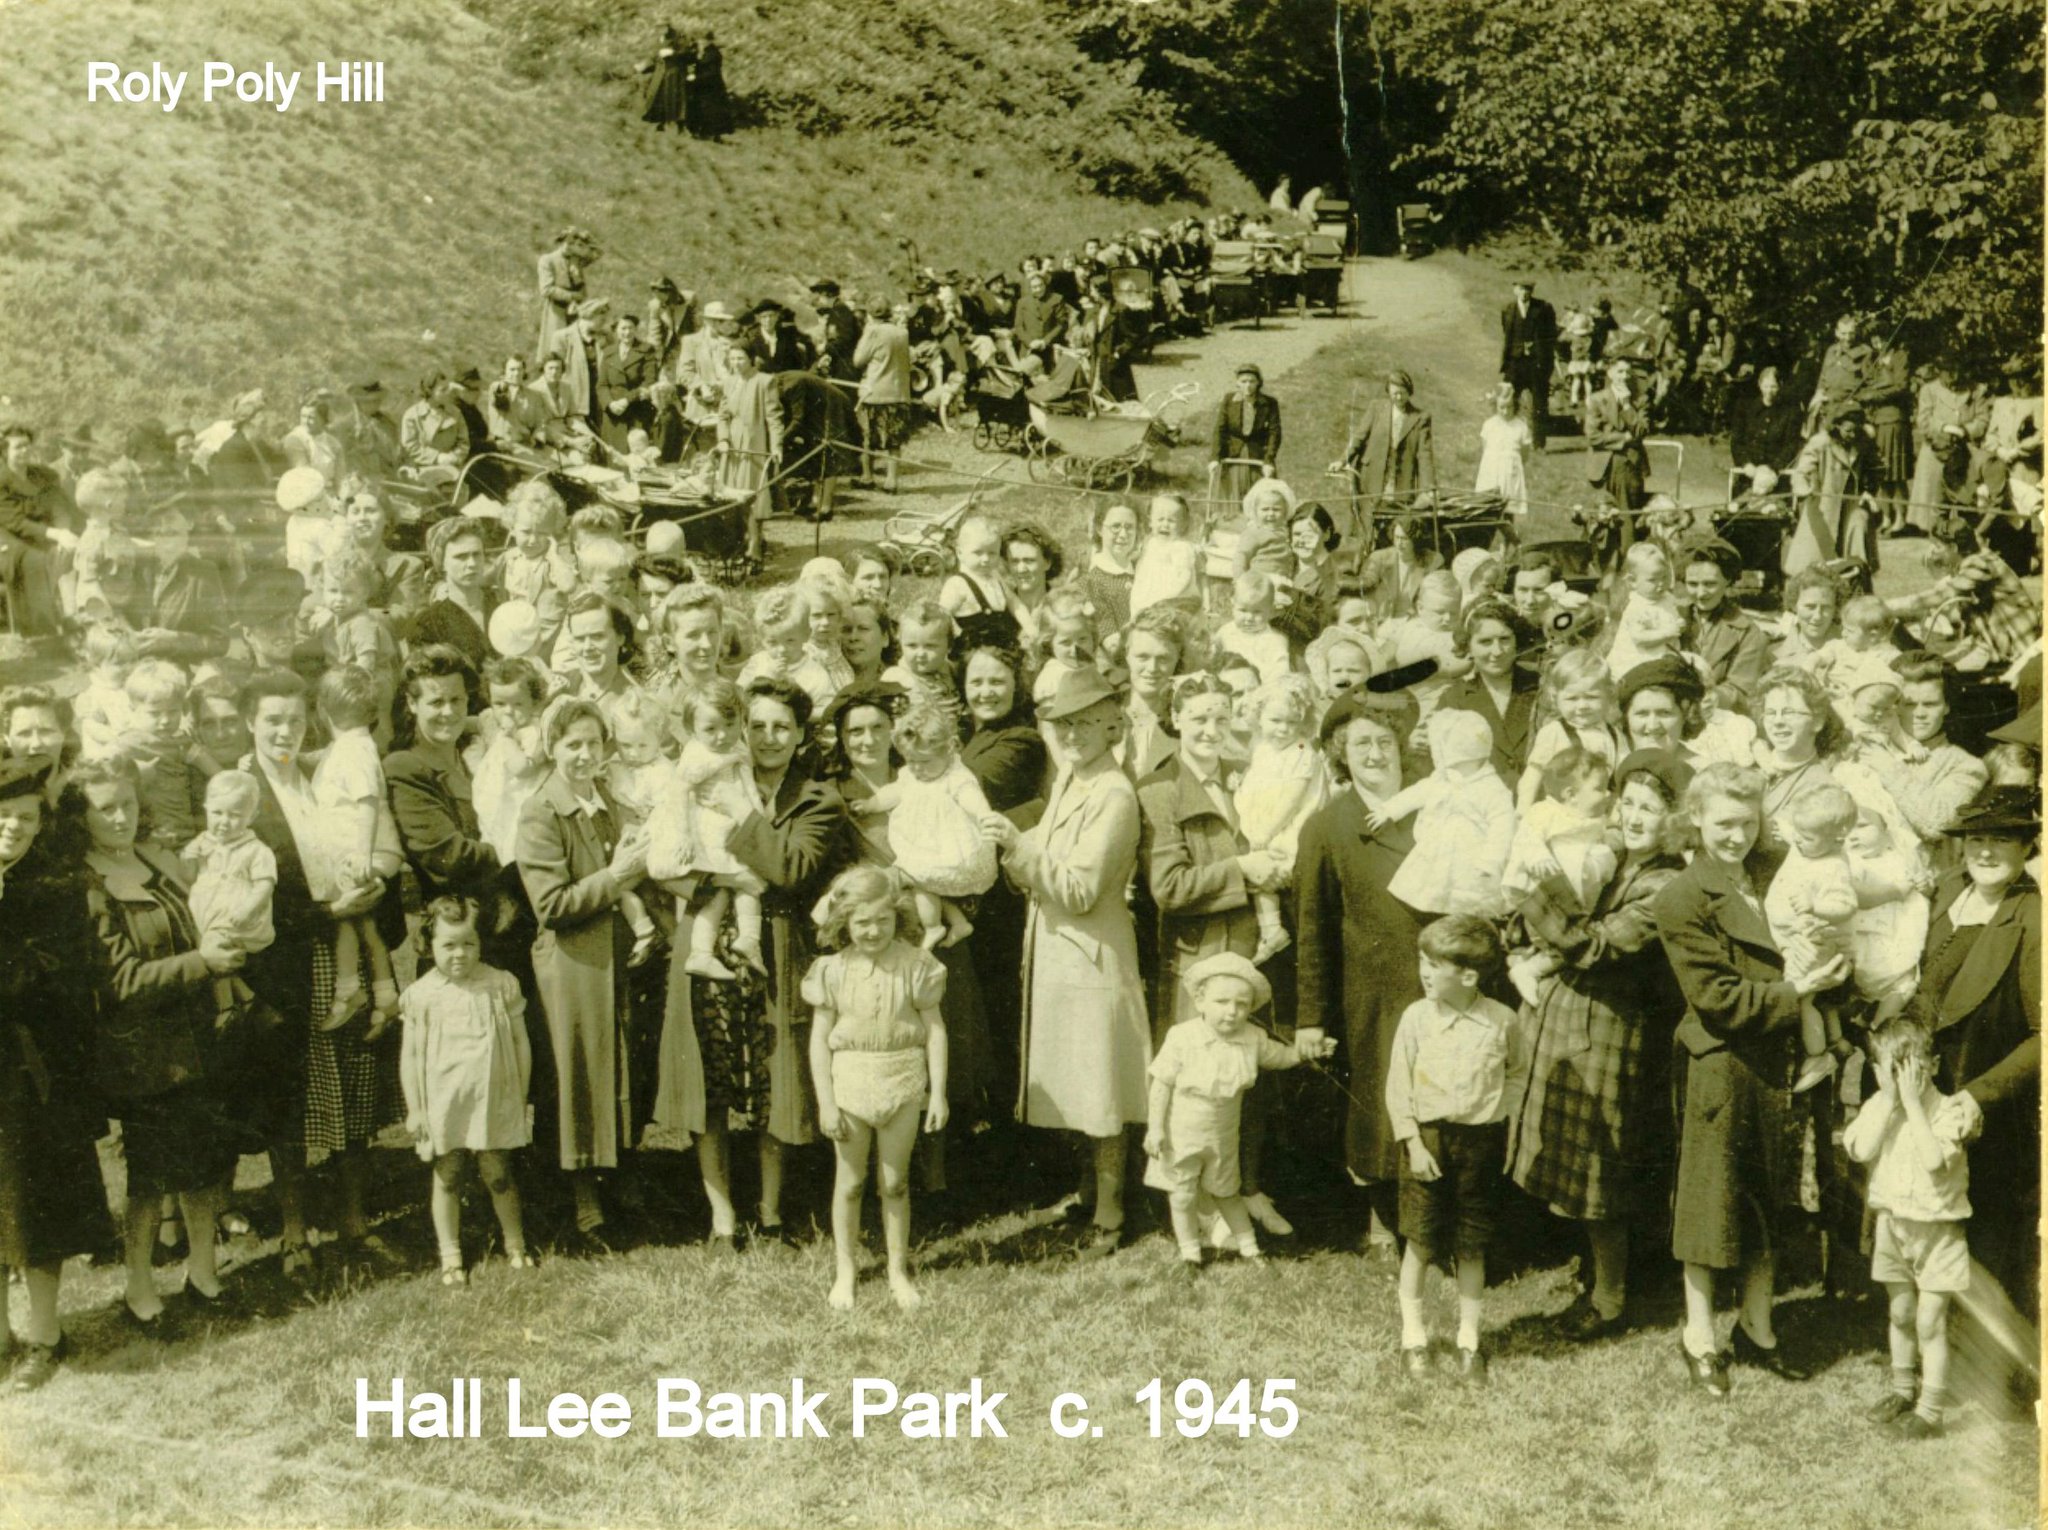 A photo of Hall Lee Bank Park